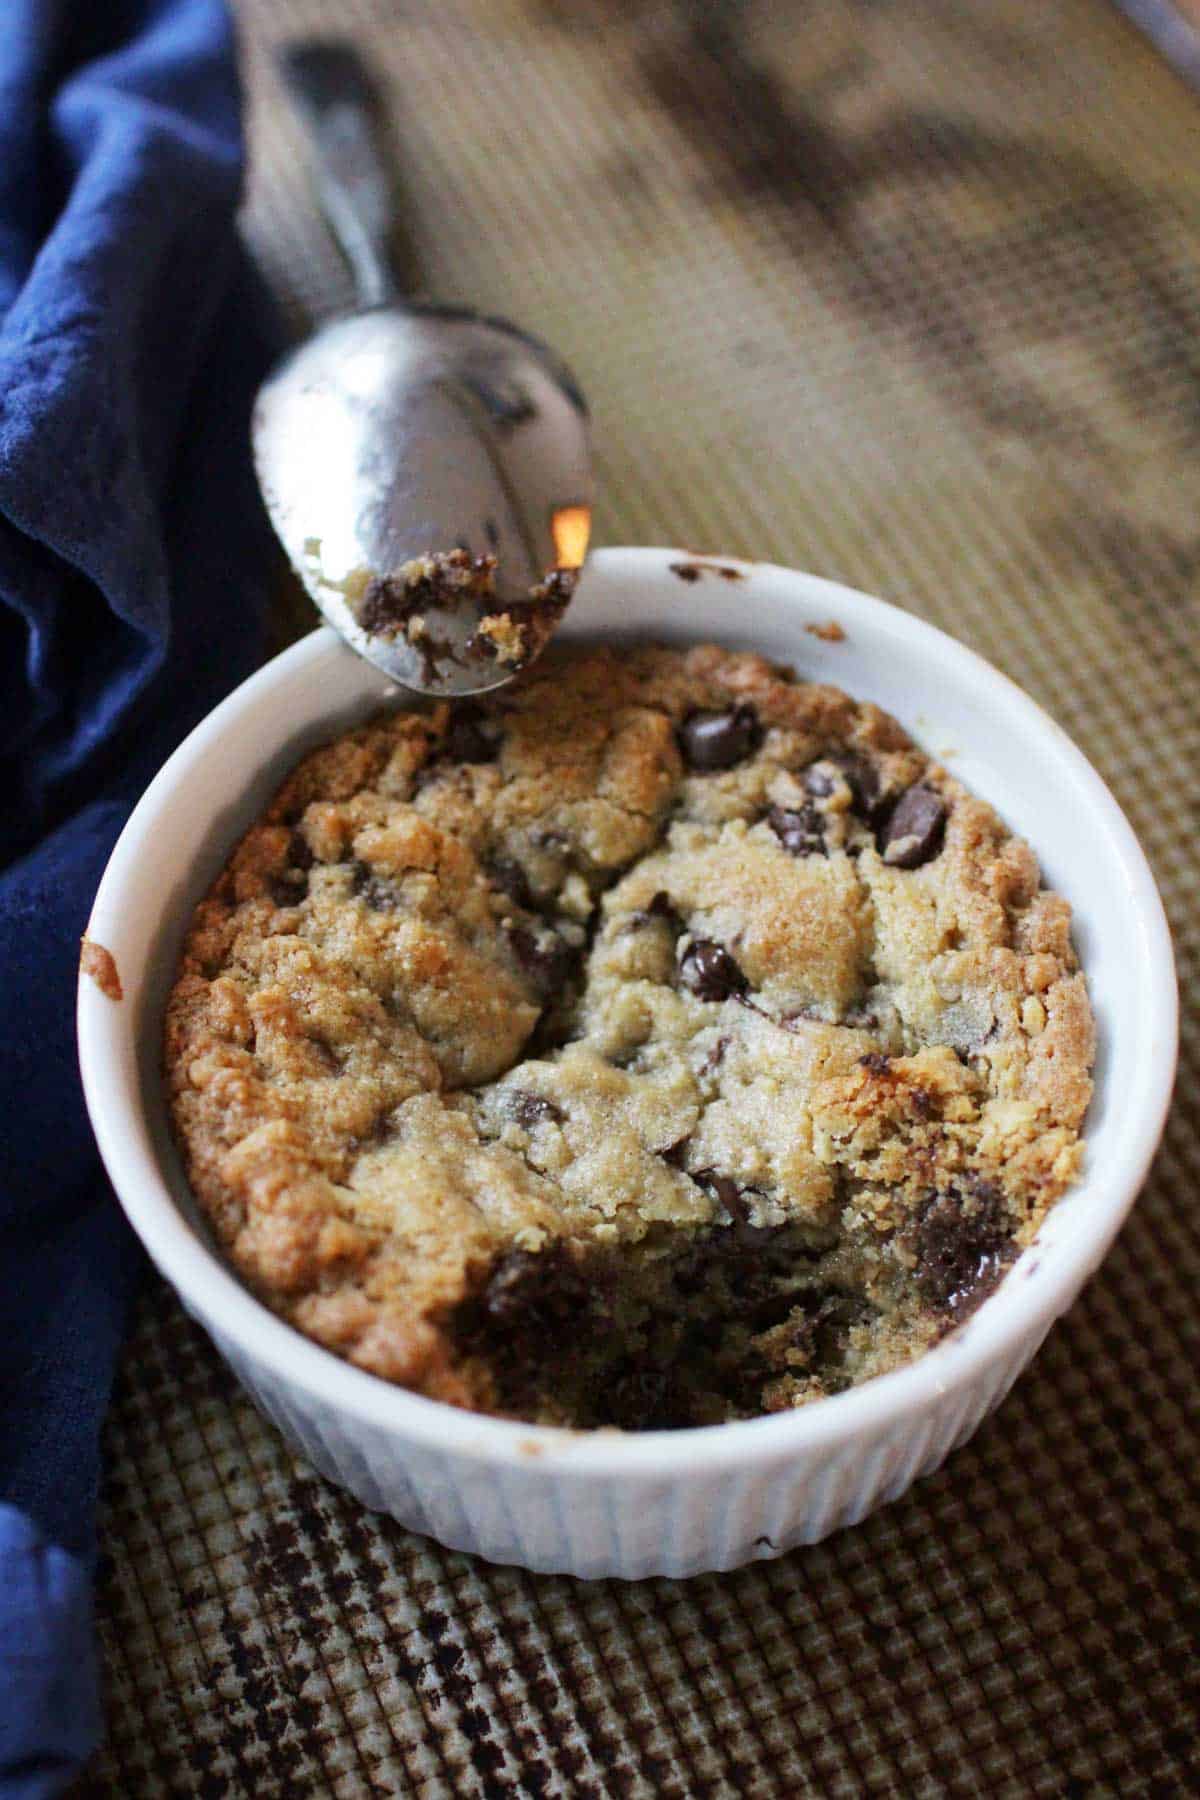 A spoon resting on the edge of a ramekin filled with a deep dish cookie made with chocolate chips.